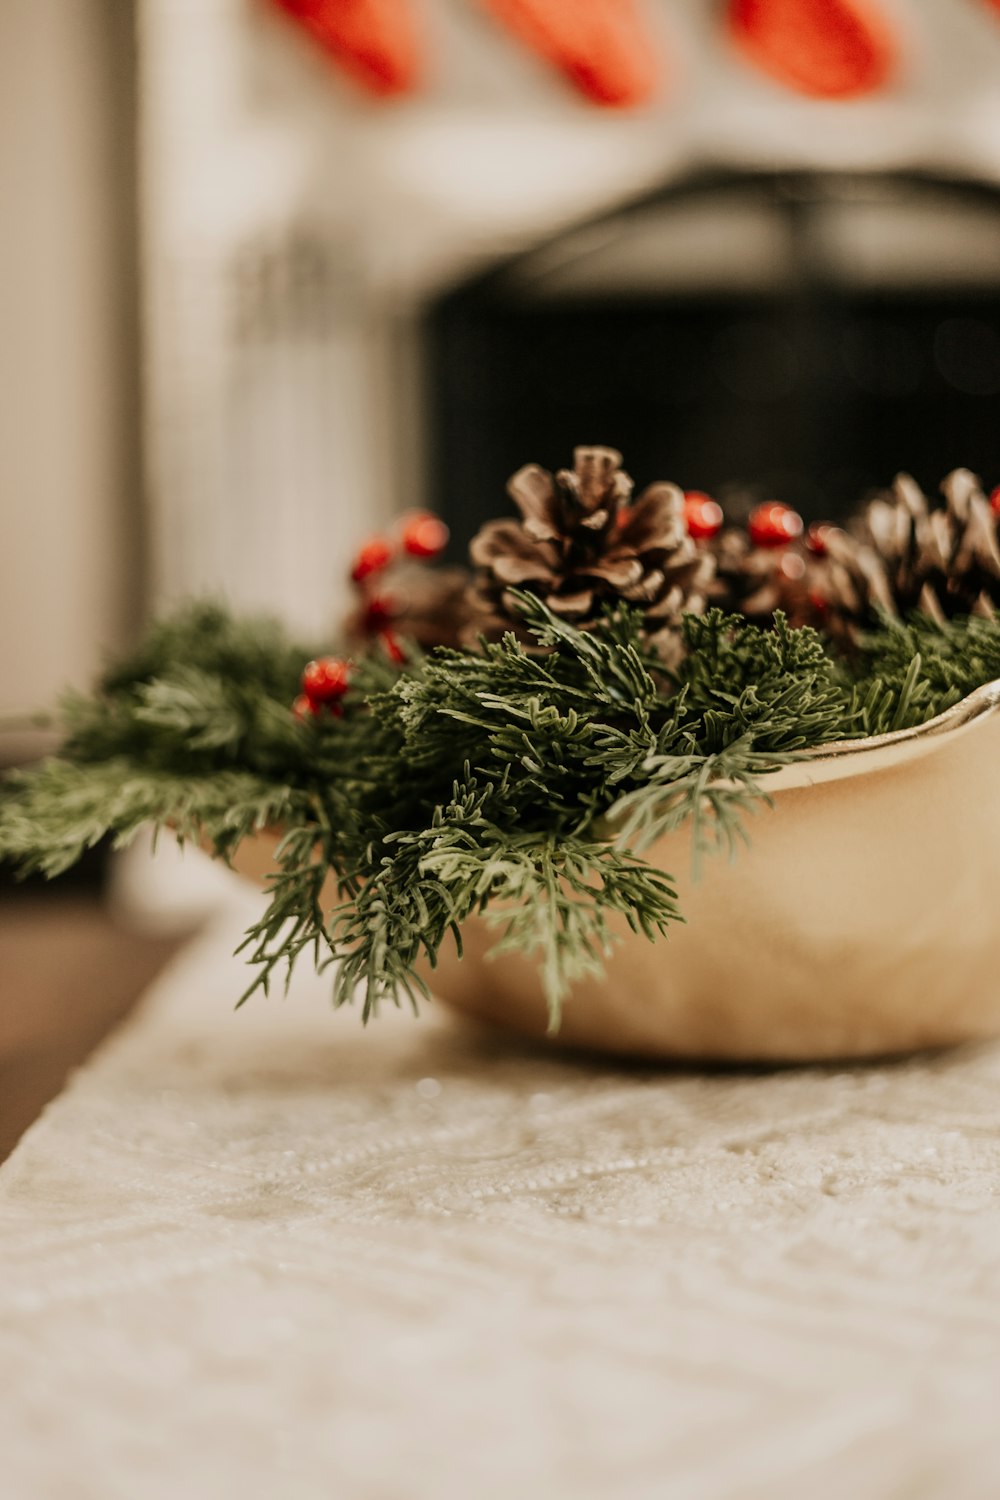 a bowl filled with pine cones and evergreen needles